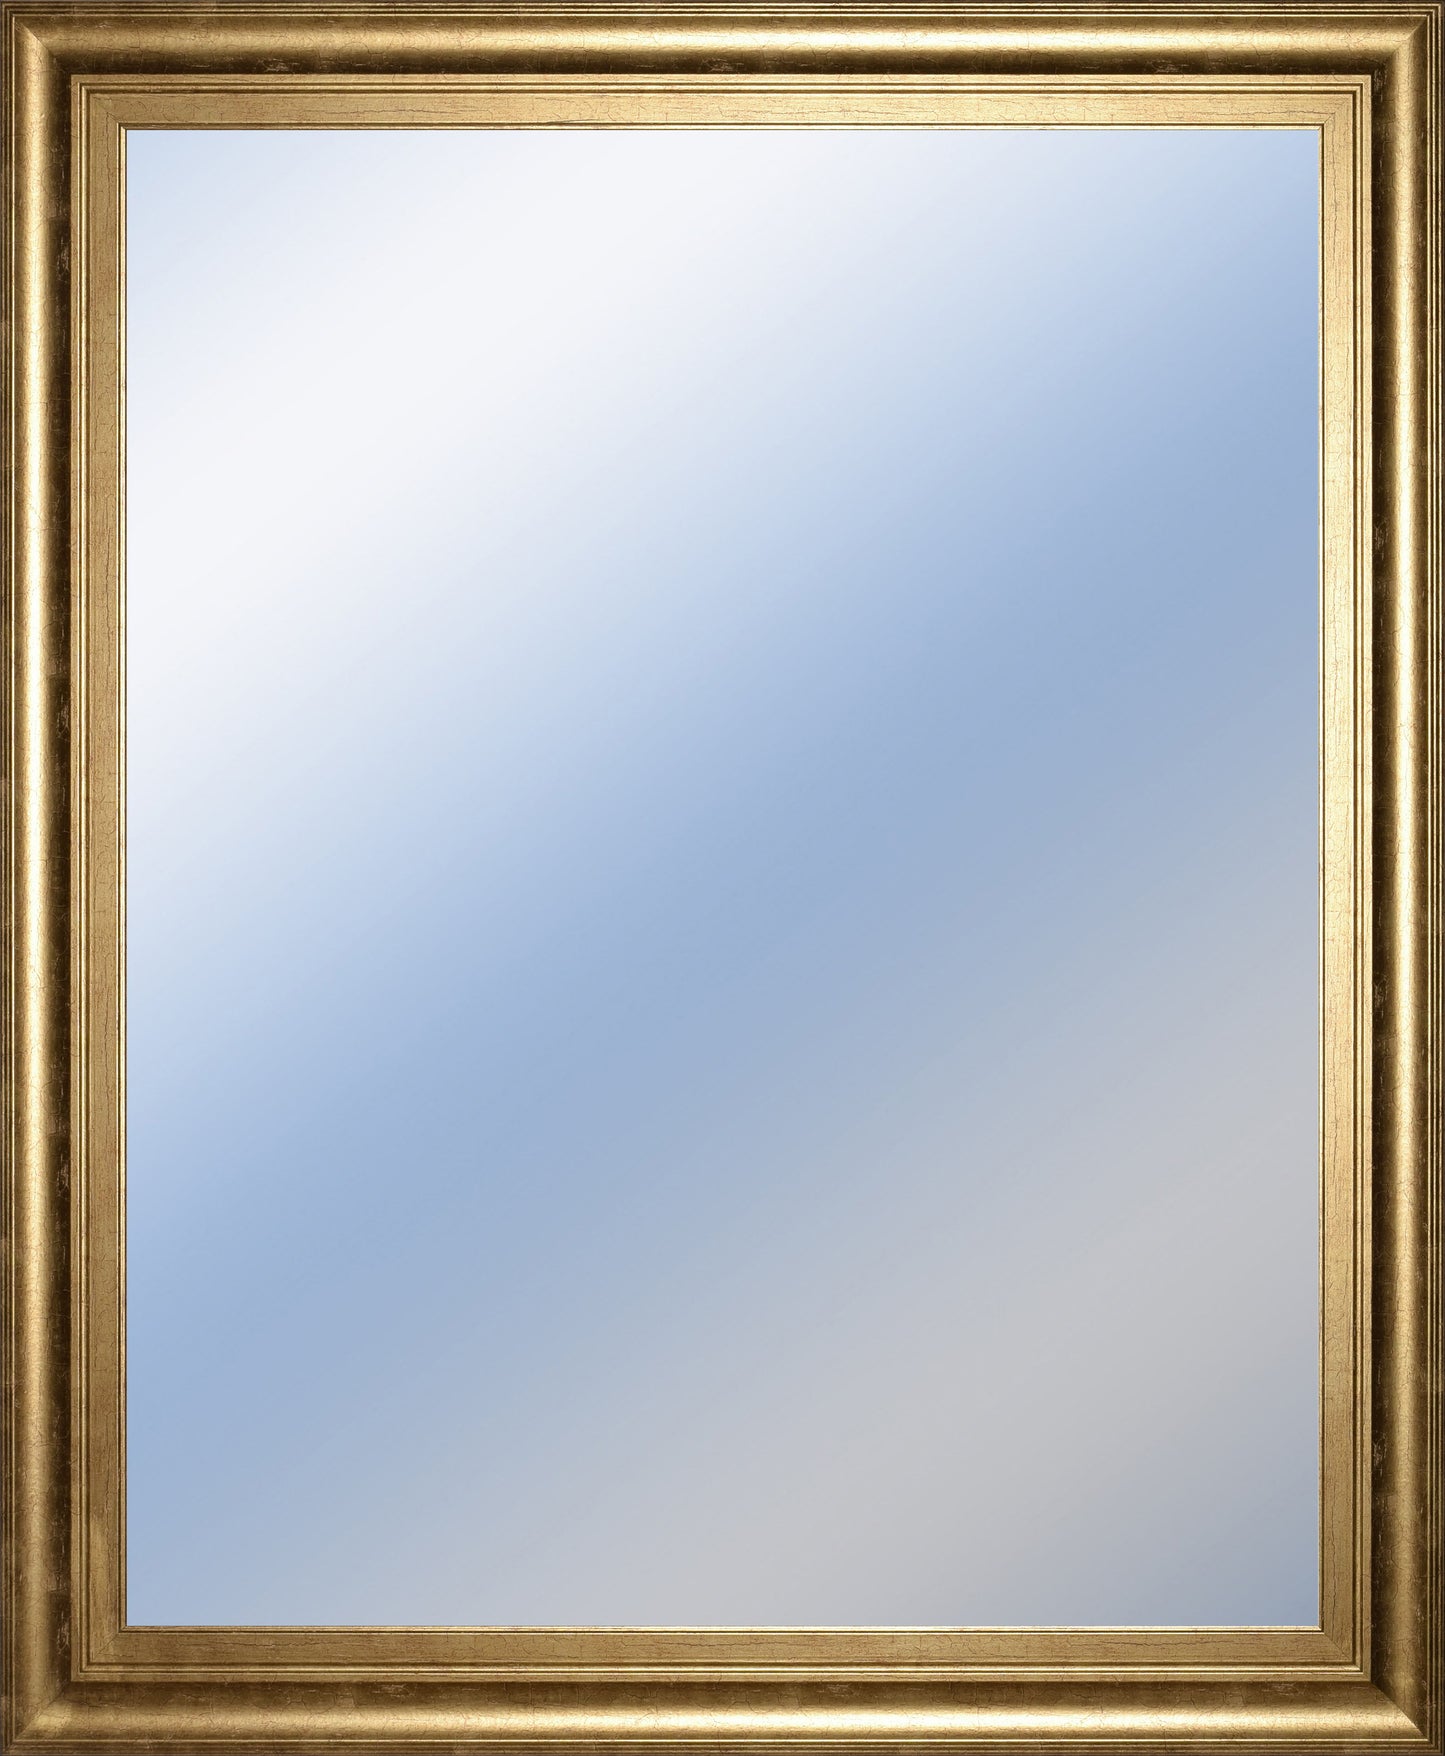 34x40 Decorative Framed Wall Mirror By Classy Art Promotional Mirror Frame #39 - Yellow